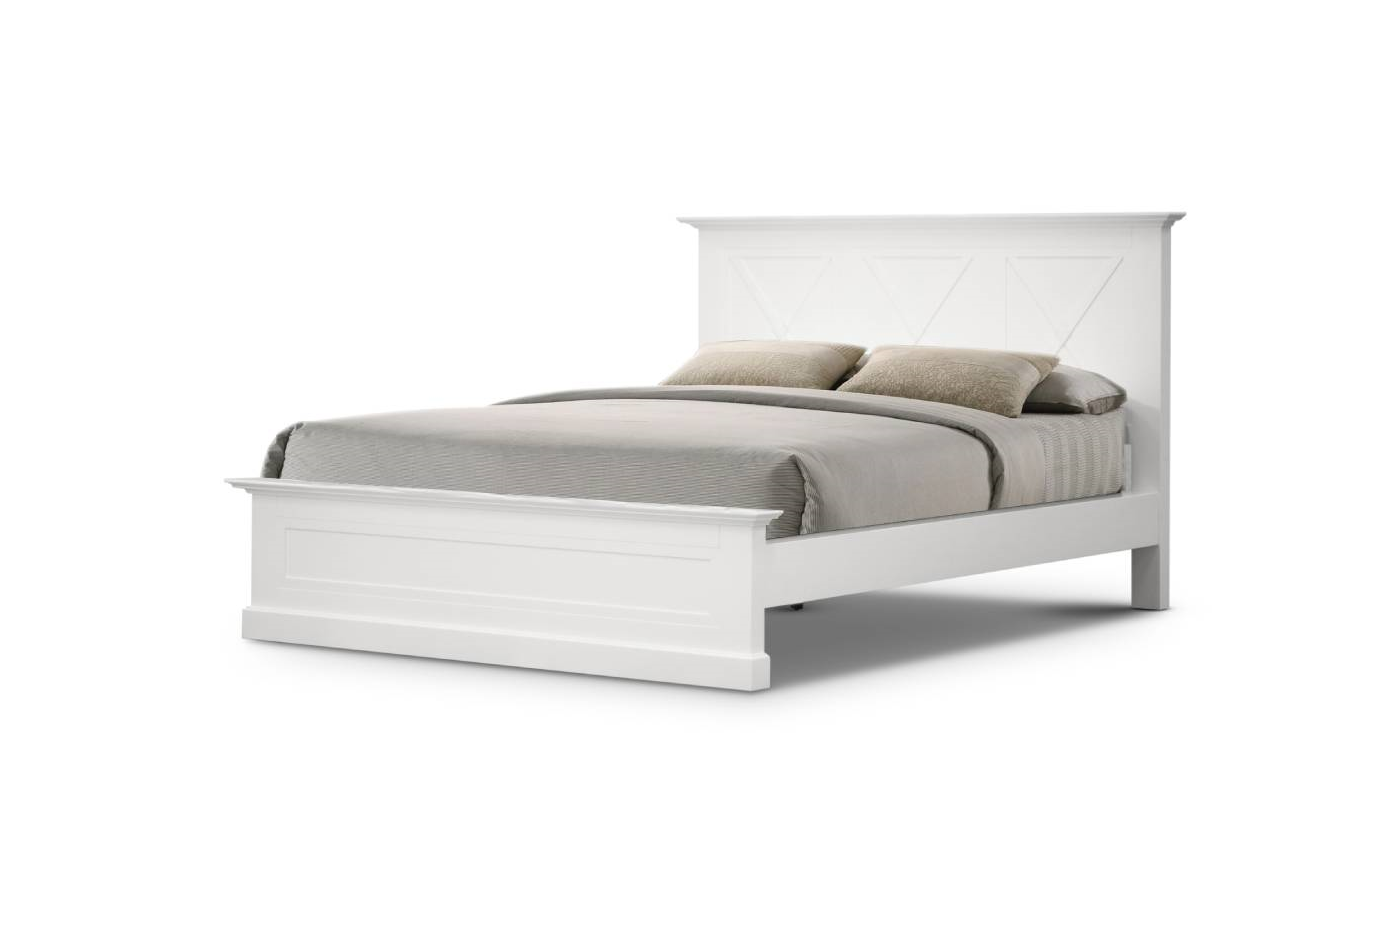 Sachzna Queen Bed